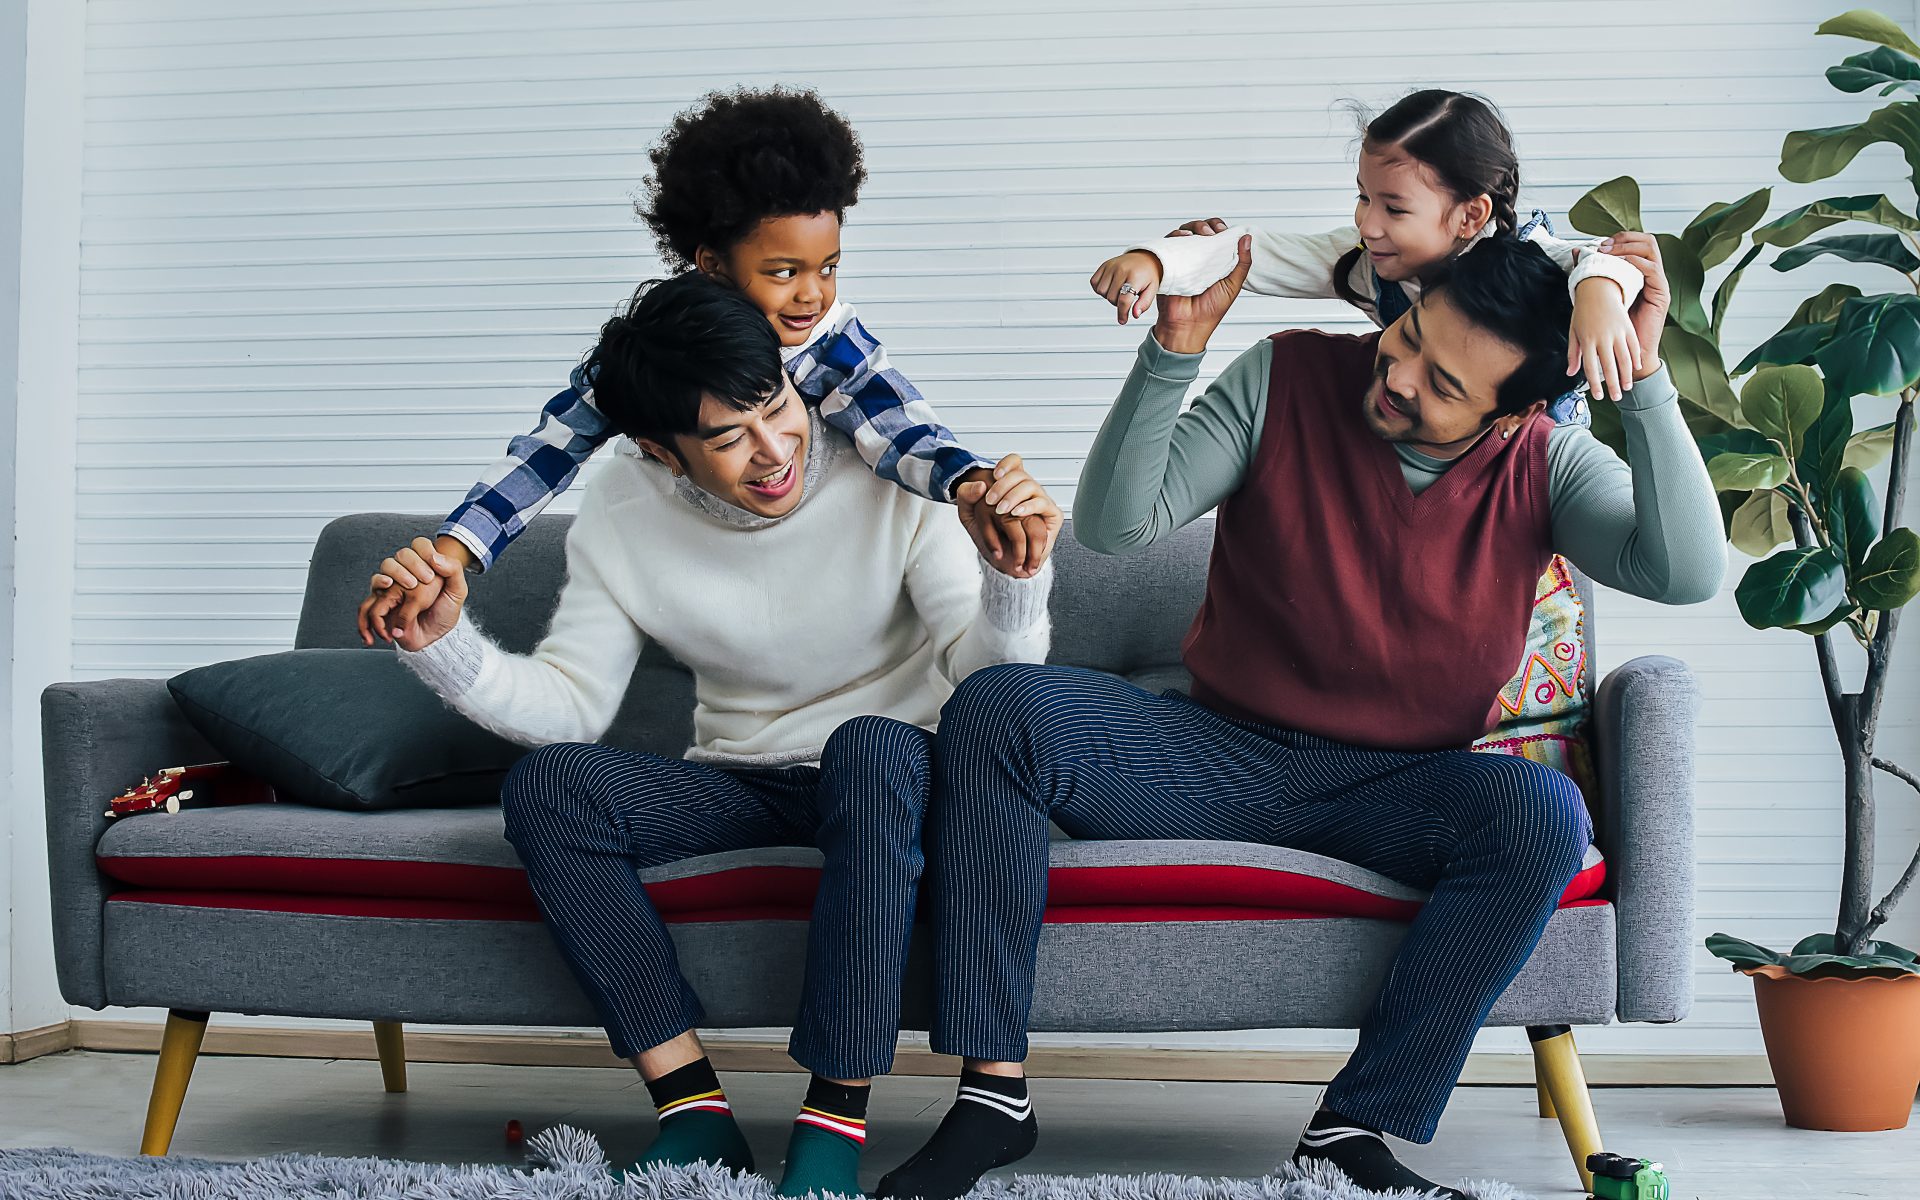 Male gay taking care adopted children who are happy diverse little Caucasian girl and African boy, hugging, playing toys together with fun, sitting on sofa in living room at home. LGBT, kids Concept